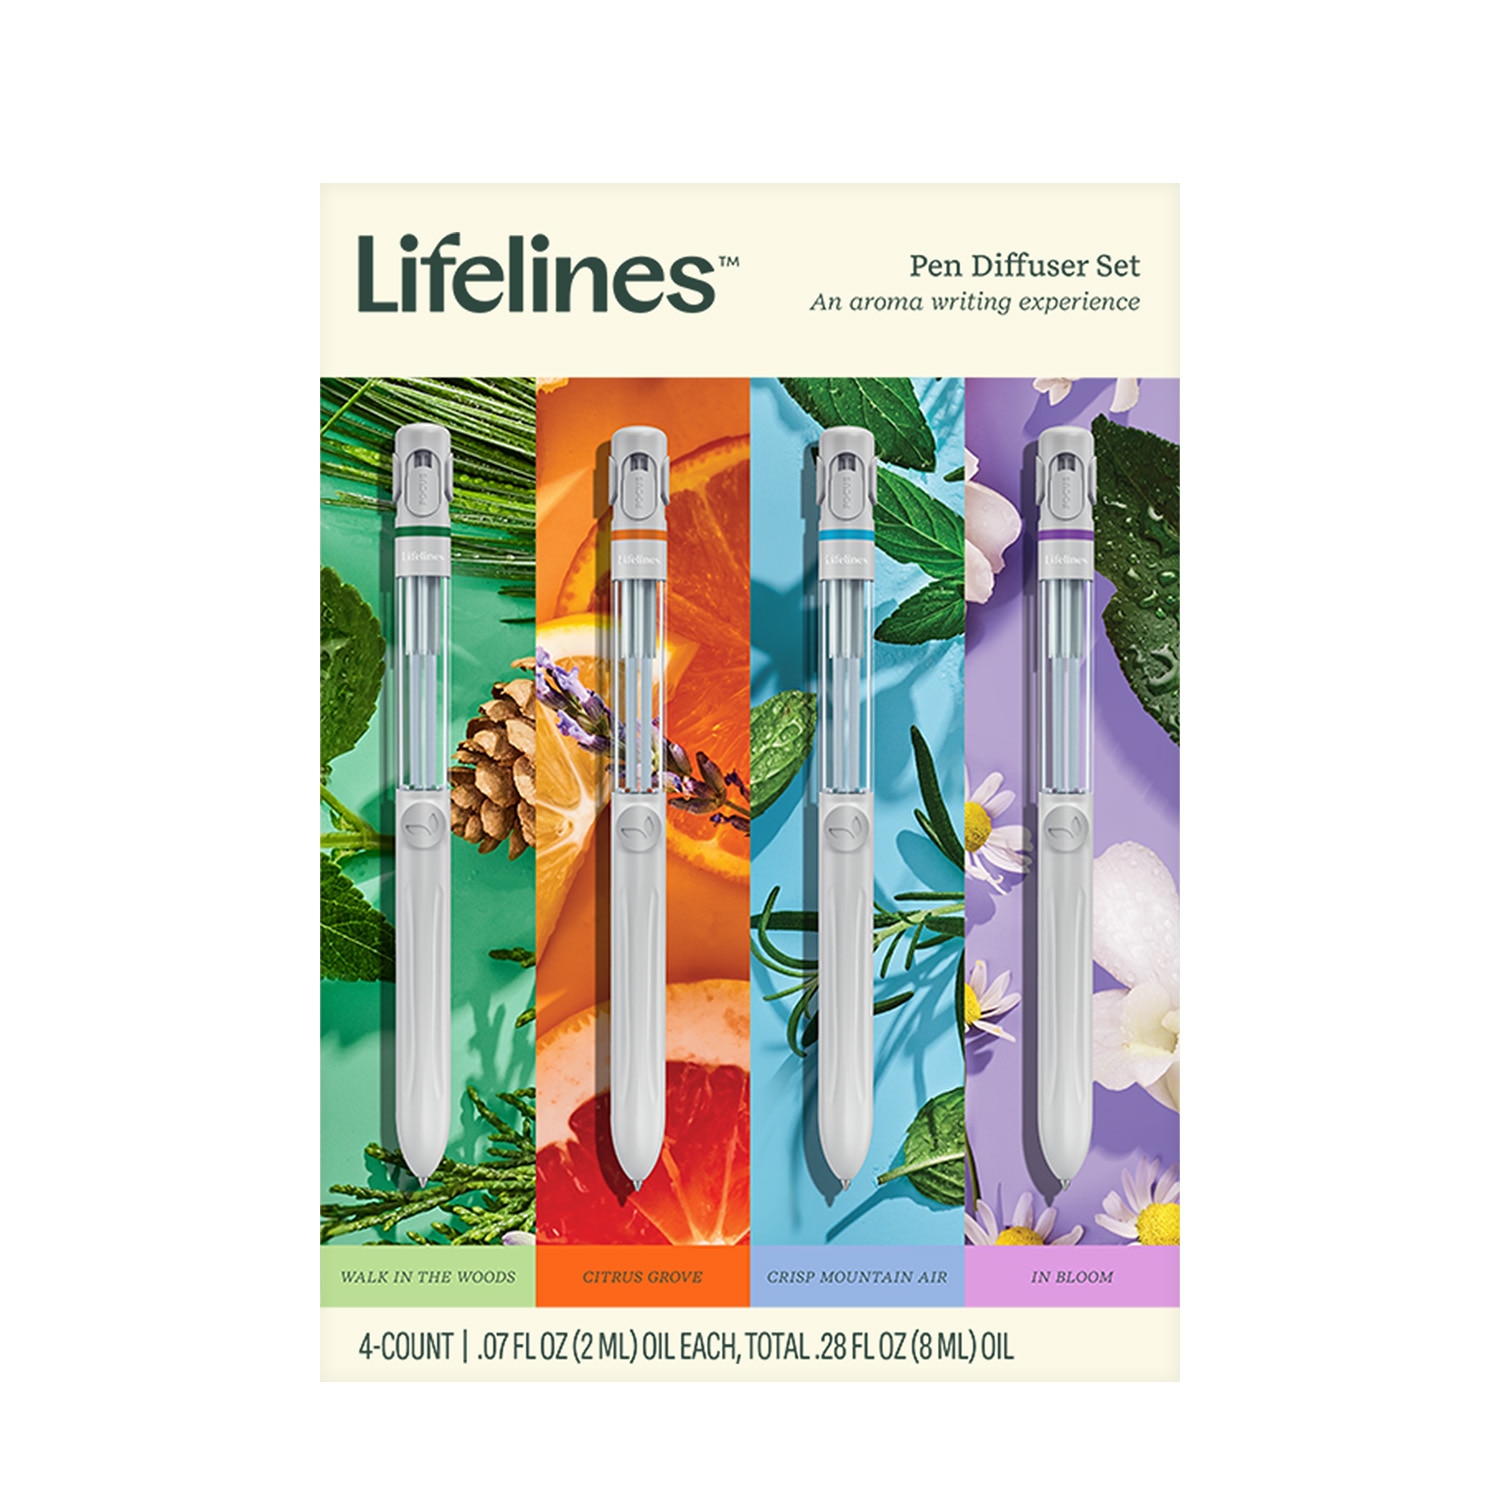 Lifelines Pen Diffuser Set 4 Pack with Assorted Essential Oil Blends - Crisp Mountain Air, In Bloom, Walk In The Woods, Citrus Grove